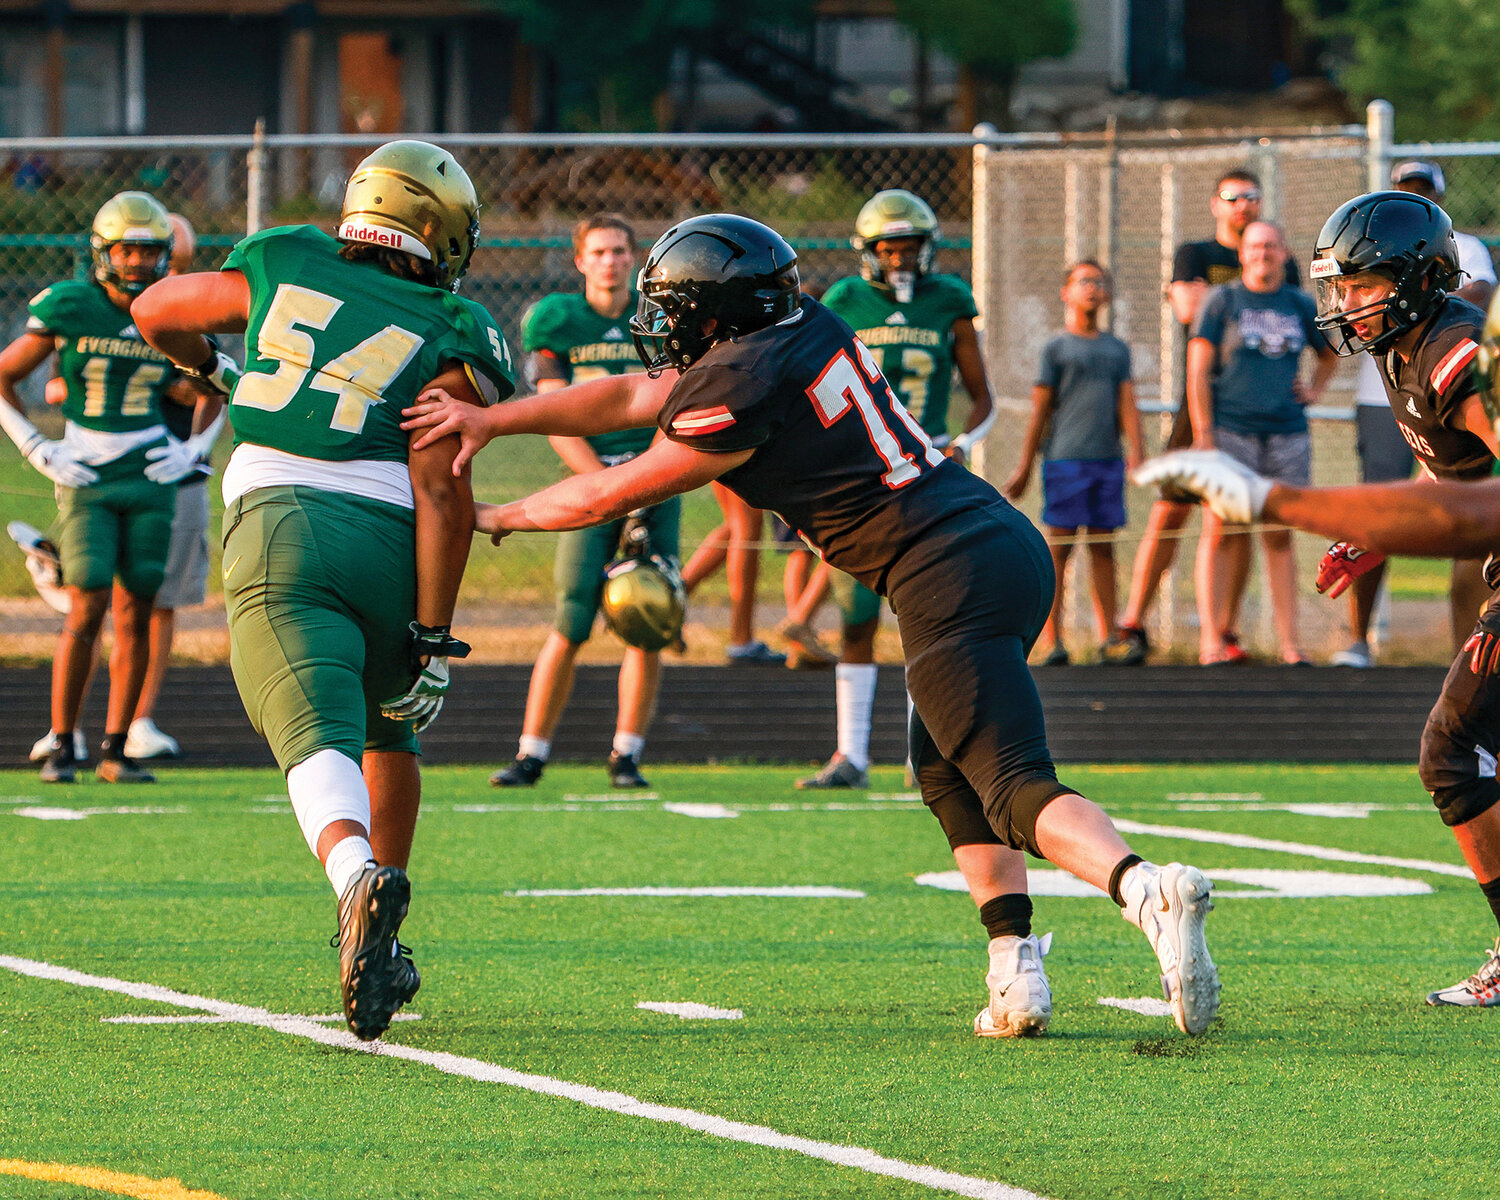 Battle Ground senior Jimmy Statham blocks a player from Evergreen High School in a jamboree scrimmage between Battle Ground, Evergreen and Columbia River High Schools at District Stadium on Friday, Aug. 25.